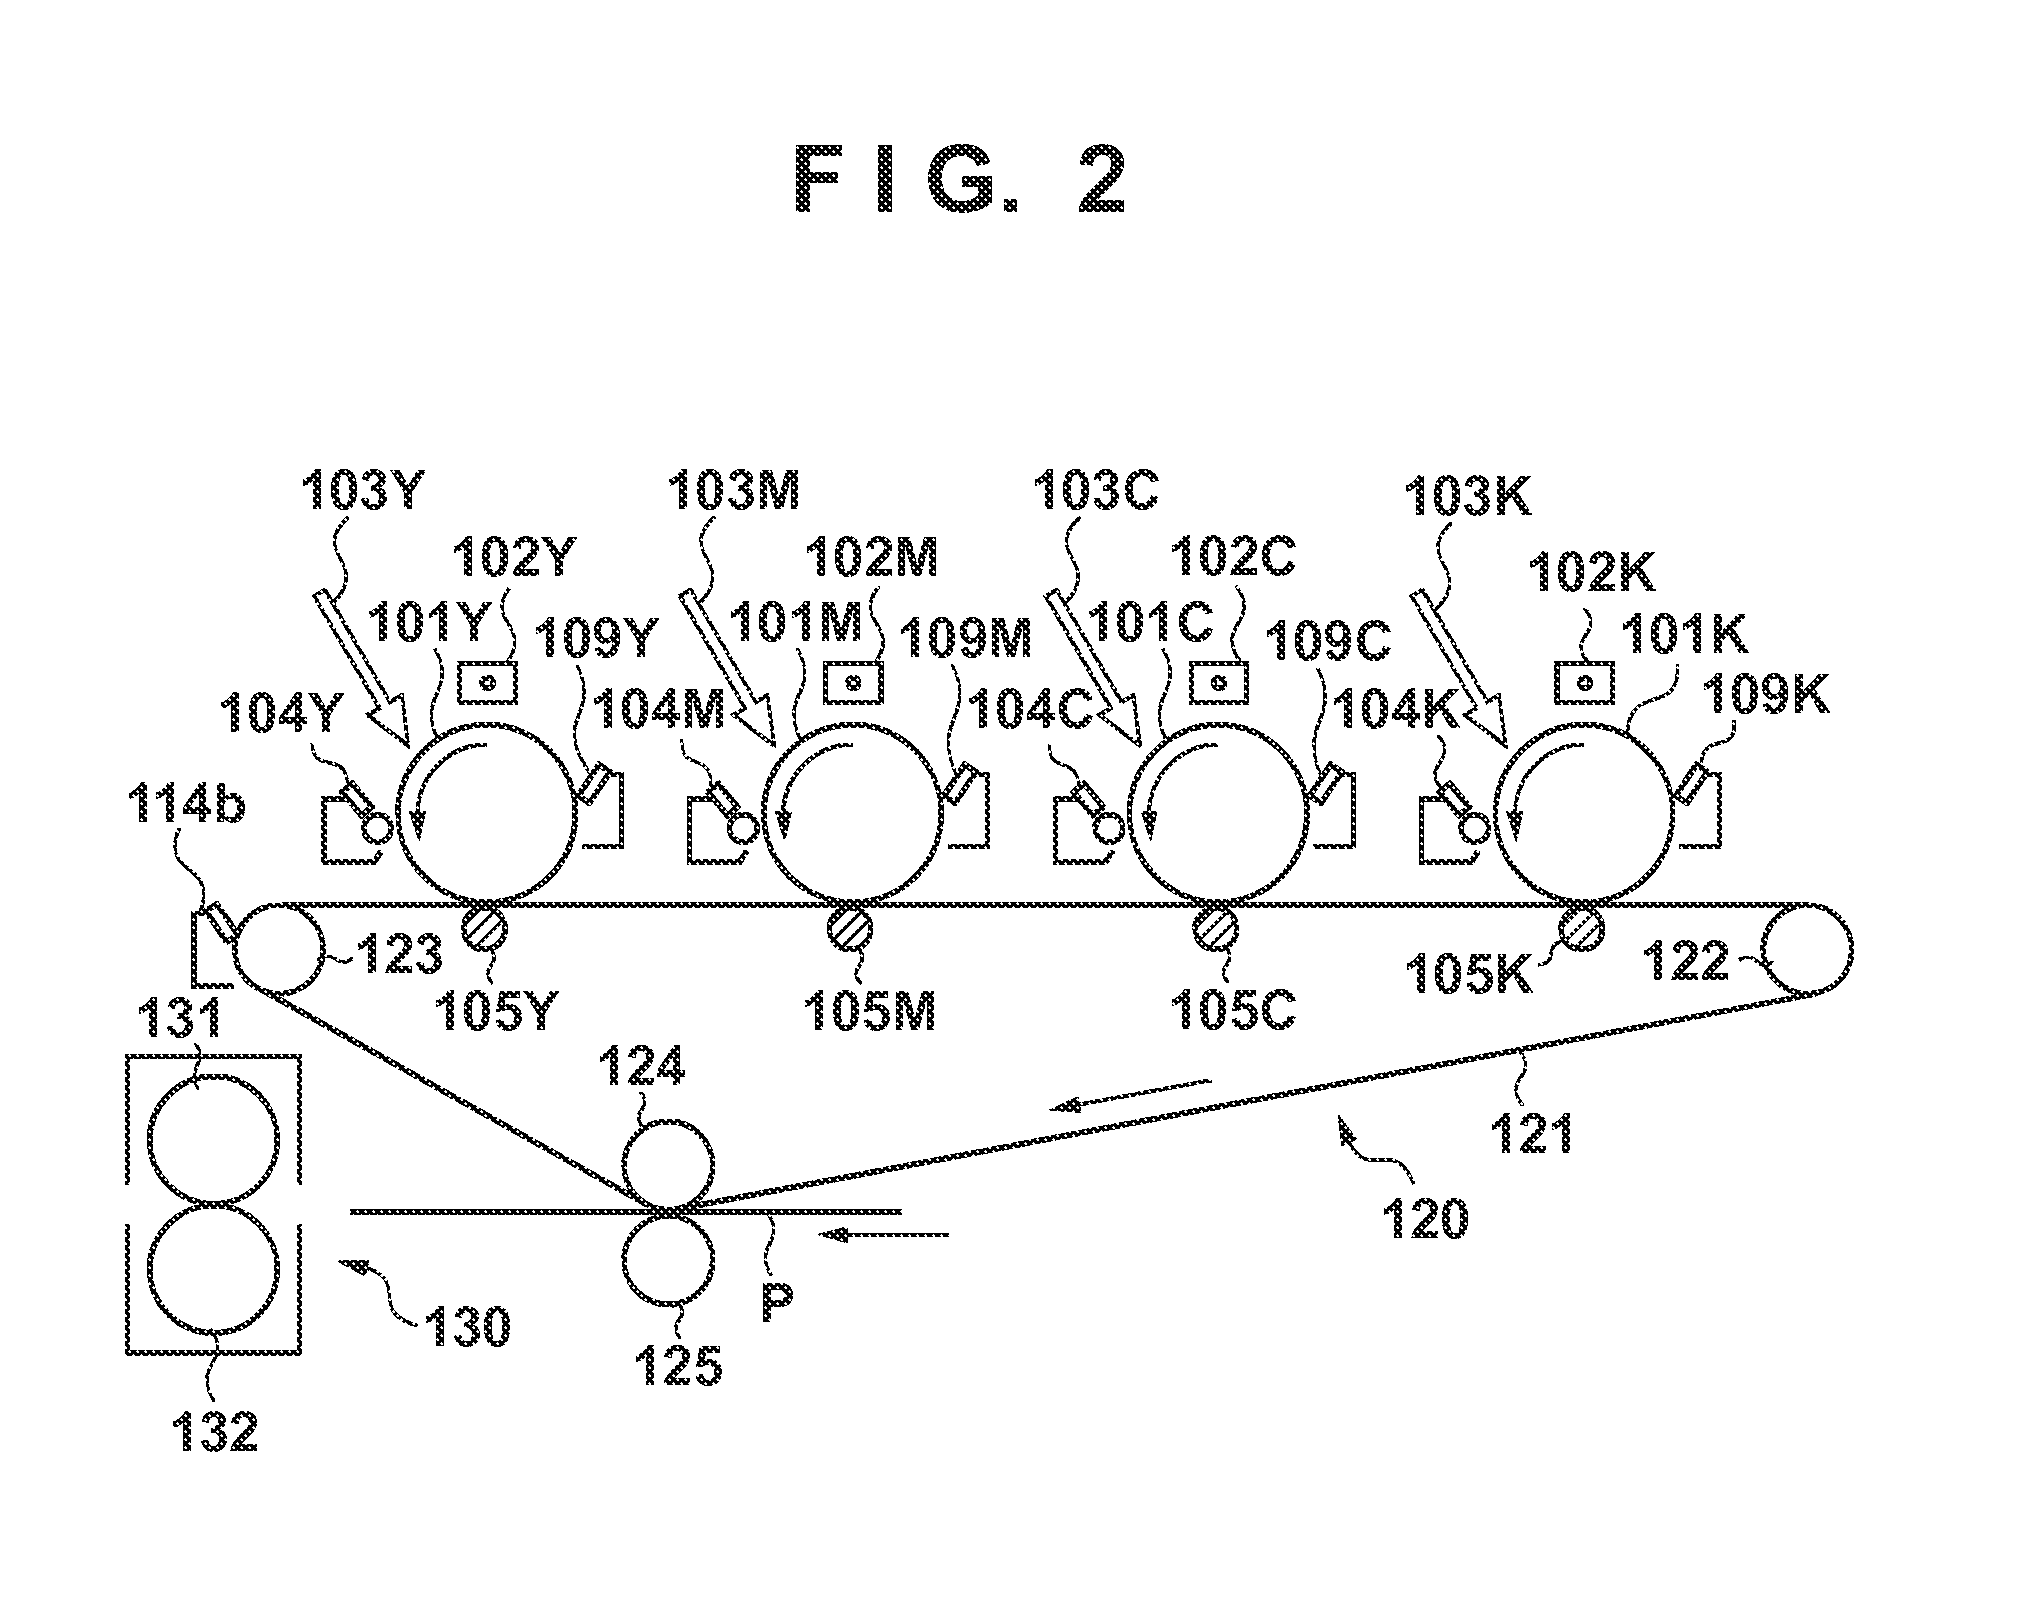 Image forming system and control apparatus utilizing dual image forming apparatuses